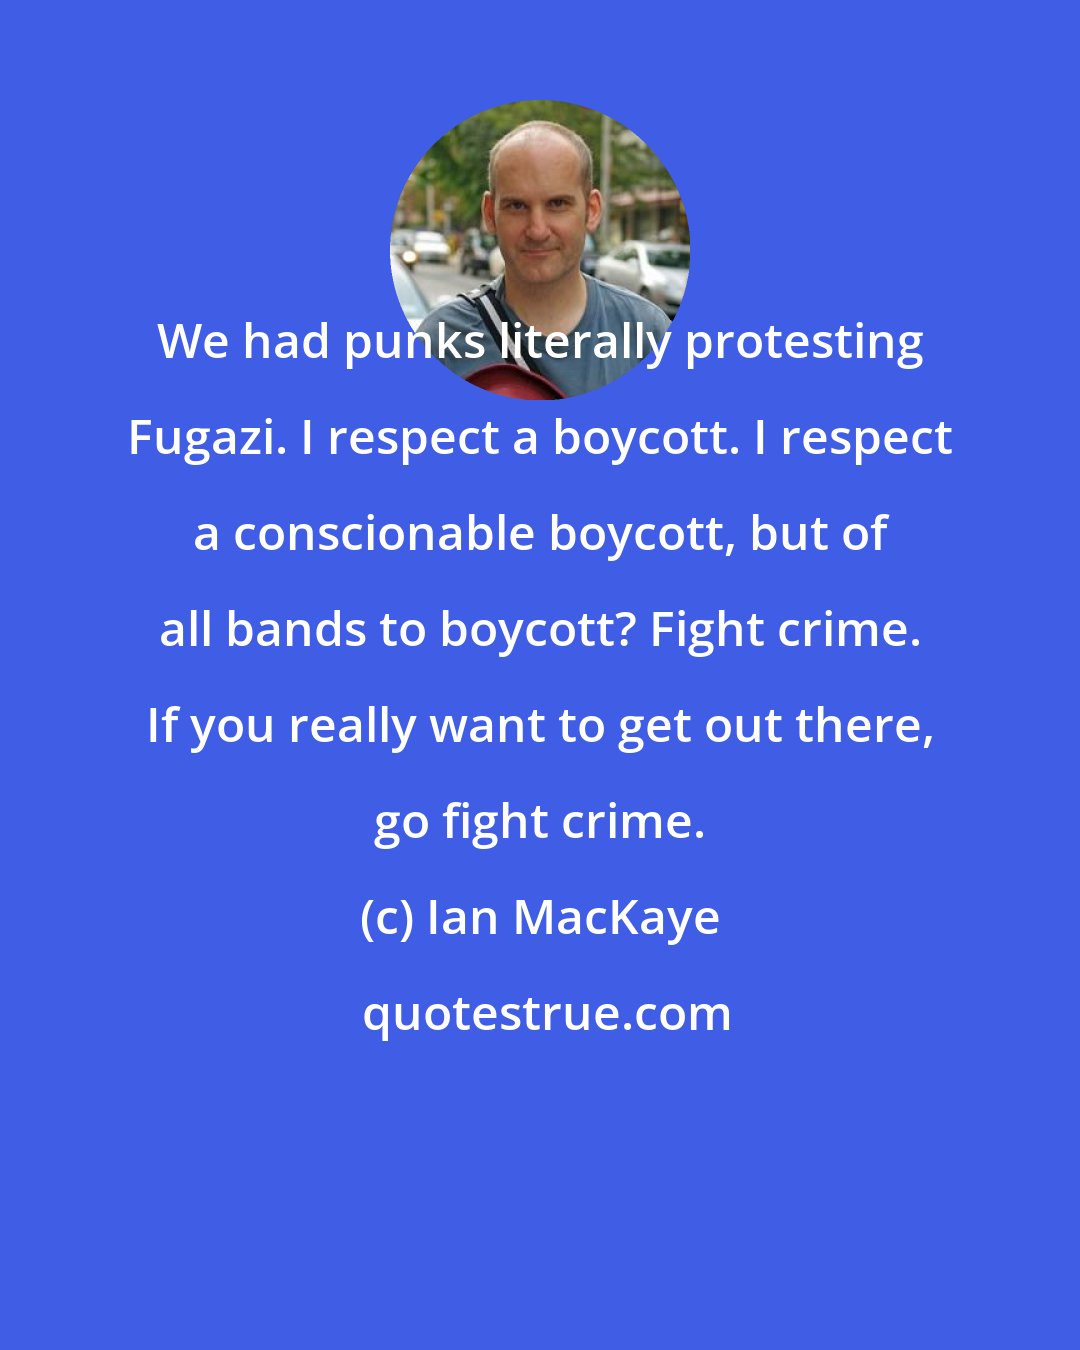 Ian MacKaye: We had punks literally protesting Fugazi. I respect a boycott. I respect a conscionable boycott, but of all bands to boycott? Fight crime. If you really want to get out there, go fight crime.